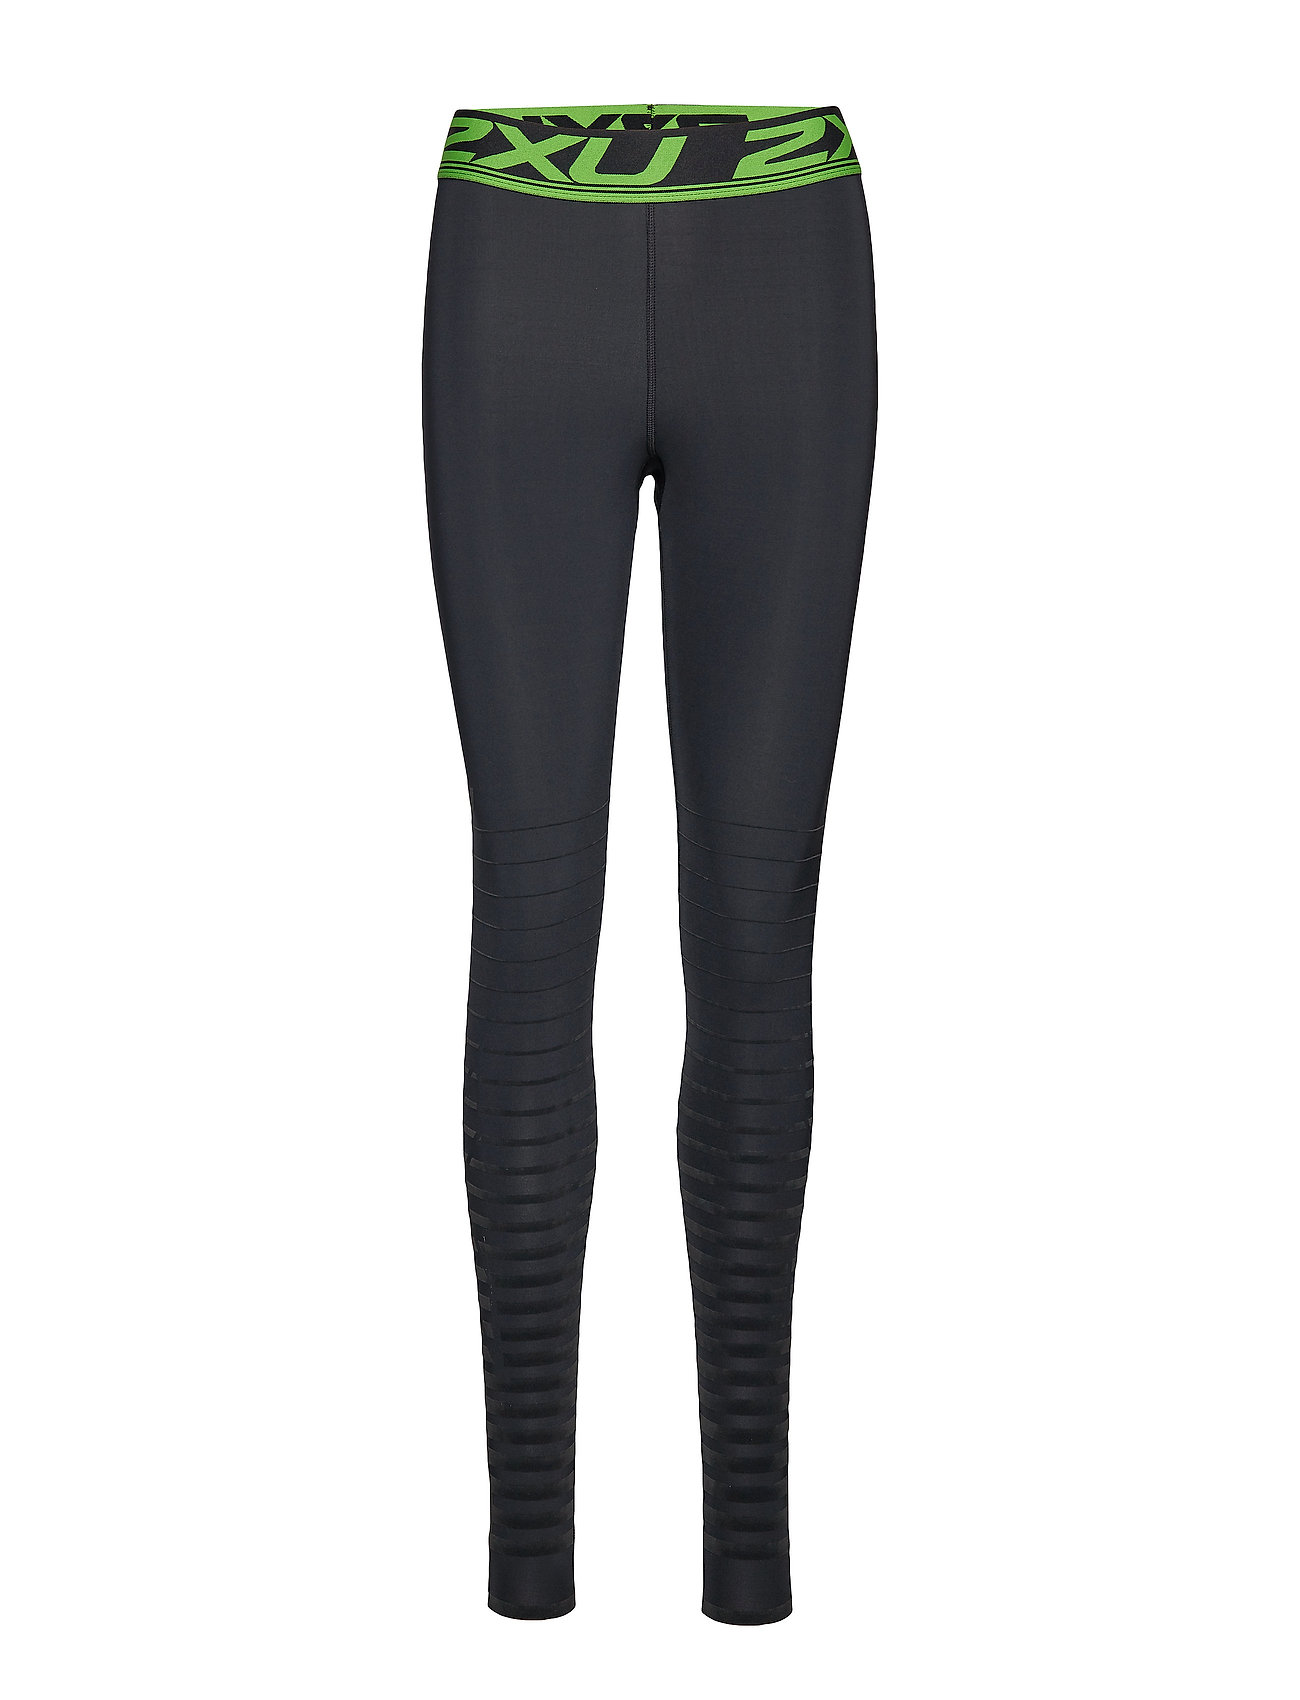 2XU Womens Power Recovery Compression Tights (Black/Nero)